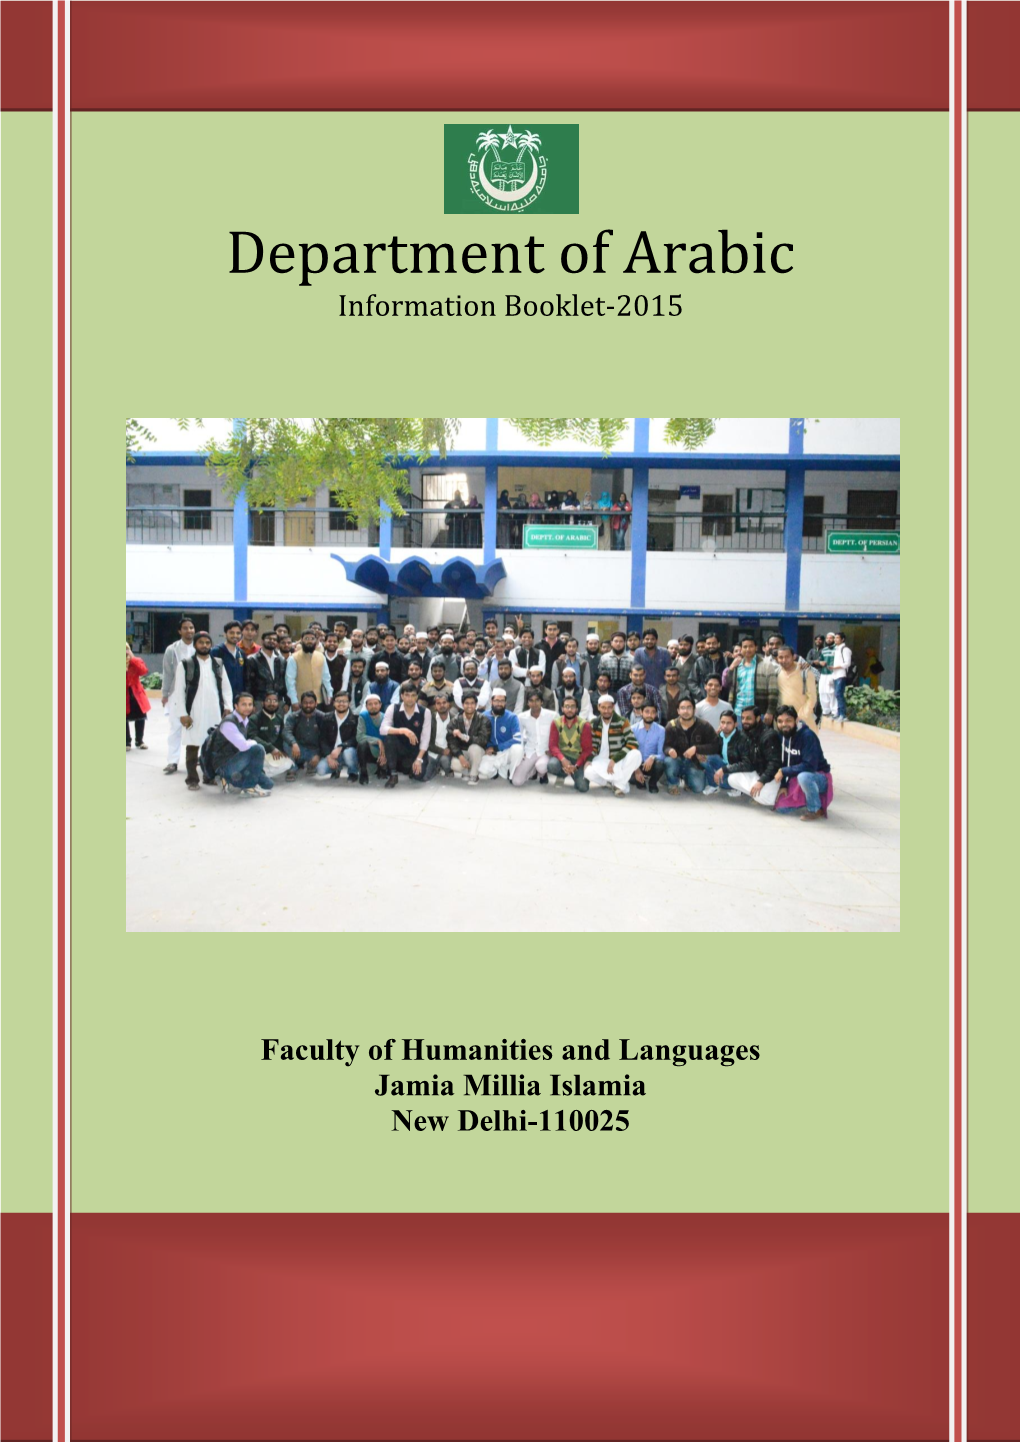 Department of Arabic Information Booklet-2015